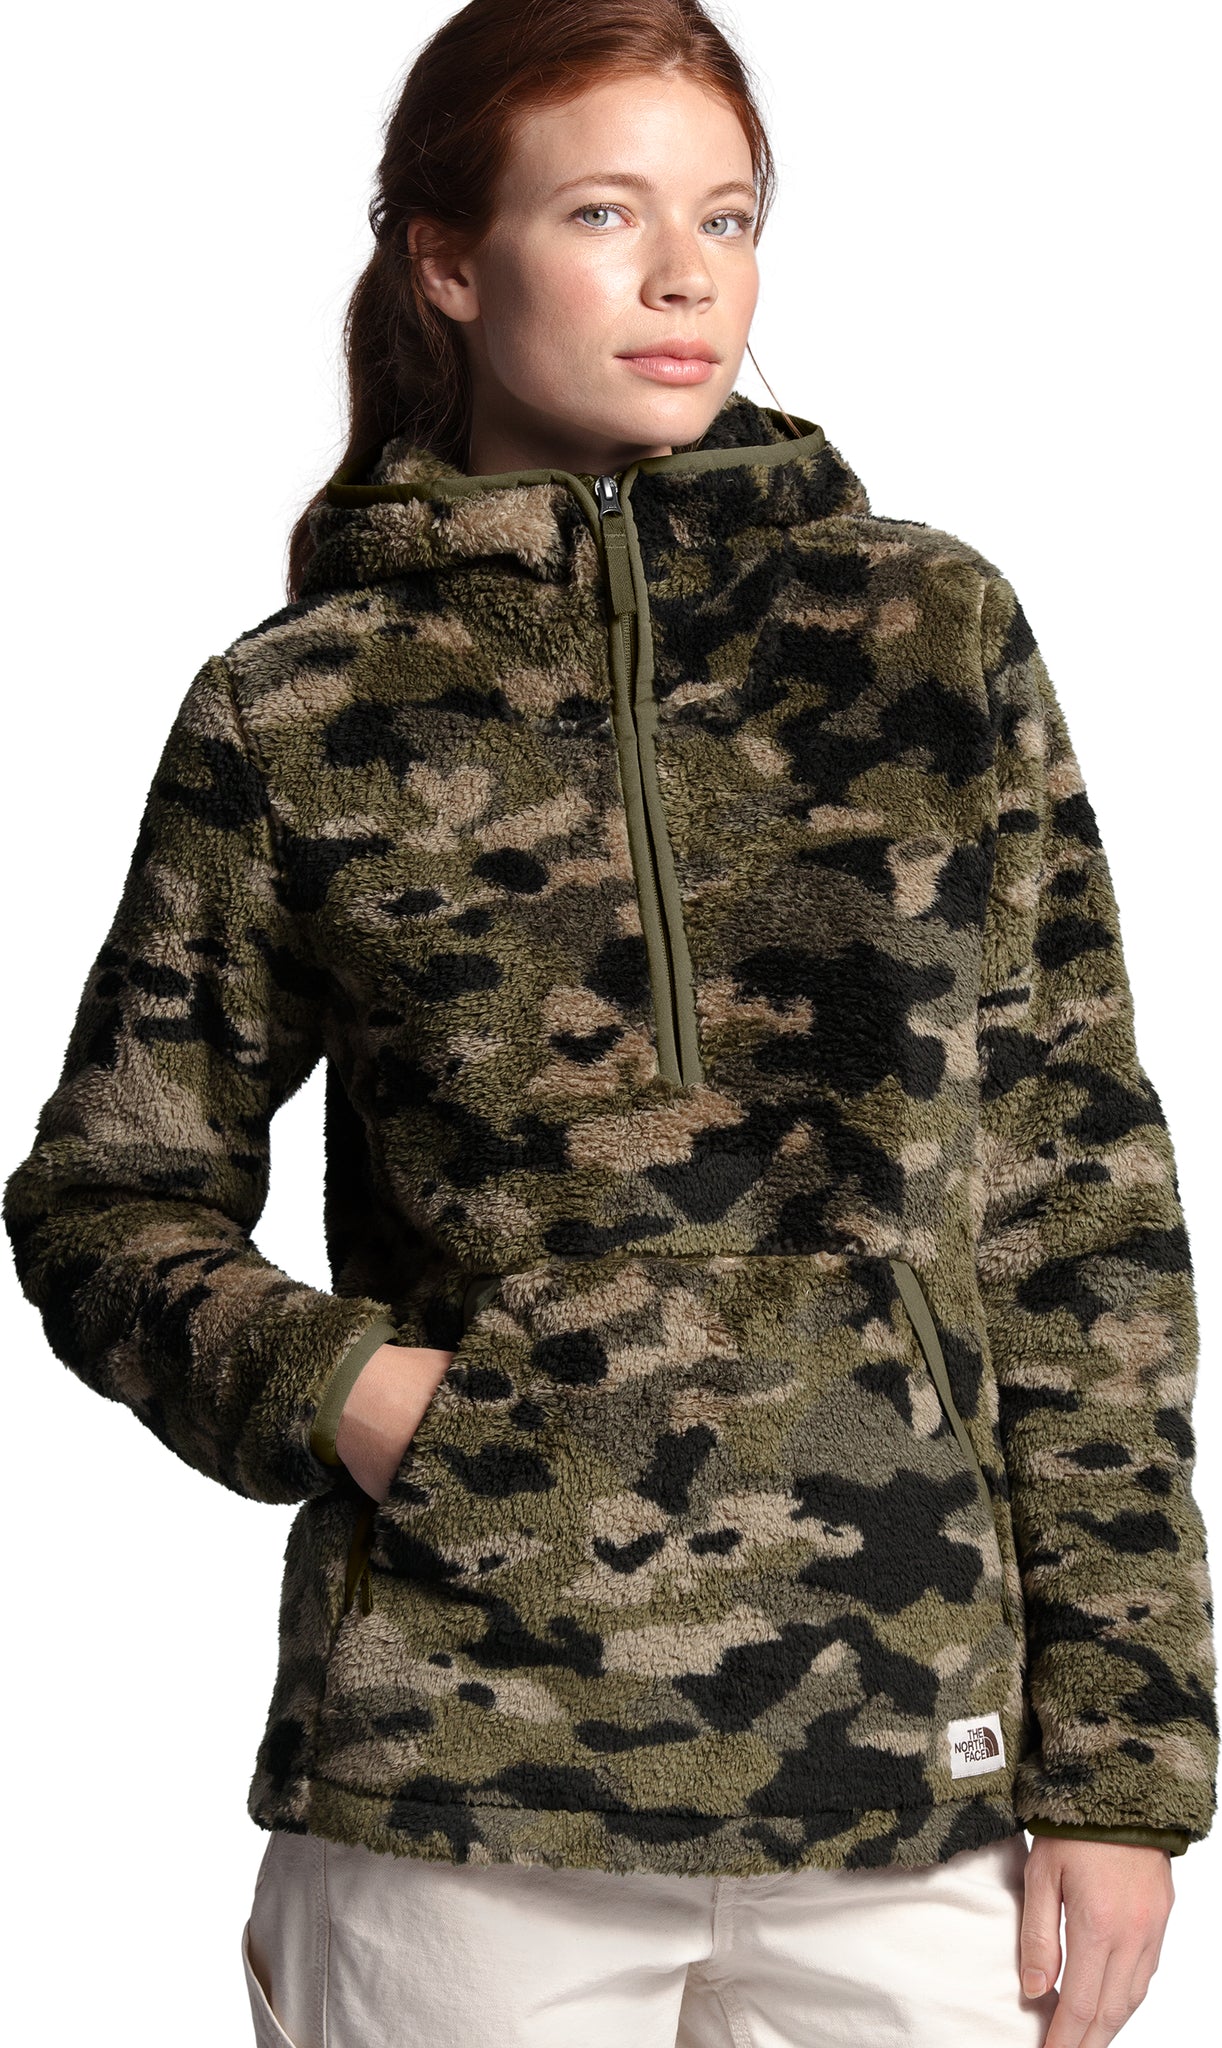 THE NORTH FACE Women's Campshire Fleece Hoodie